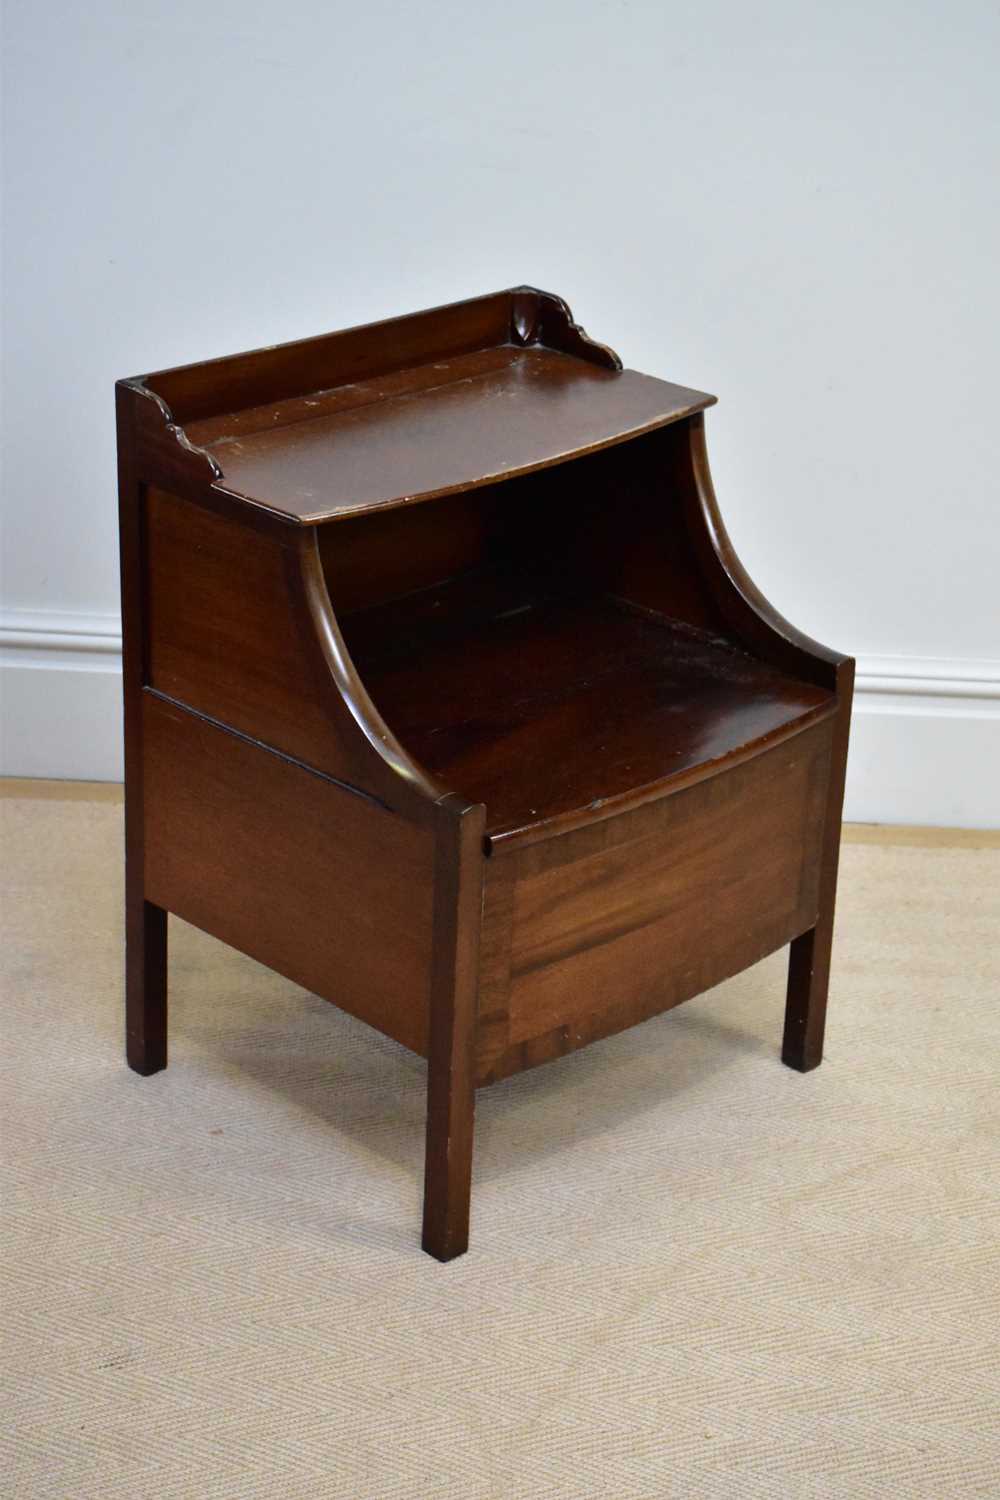 A 19th century mahogany bowfront commode, height 74cm. Provenance: Purchased Olwyn Boustead Antiques